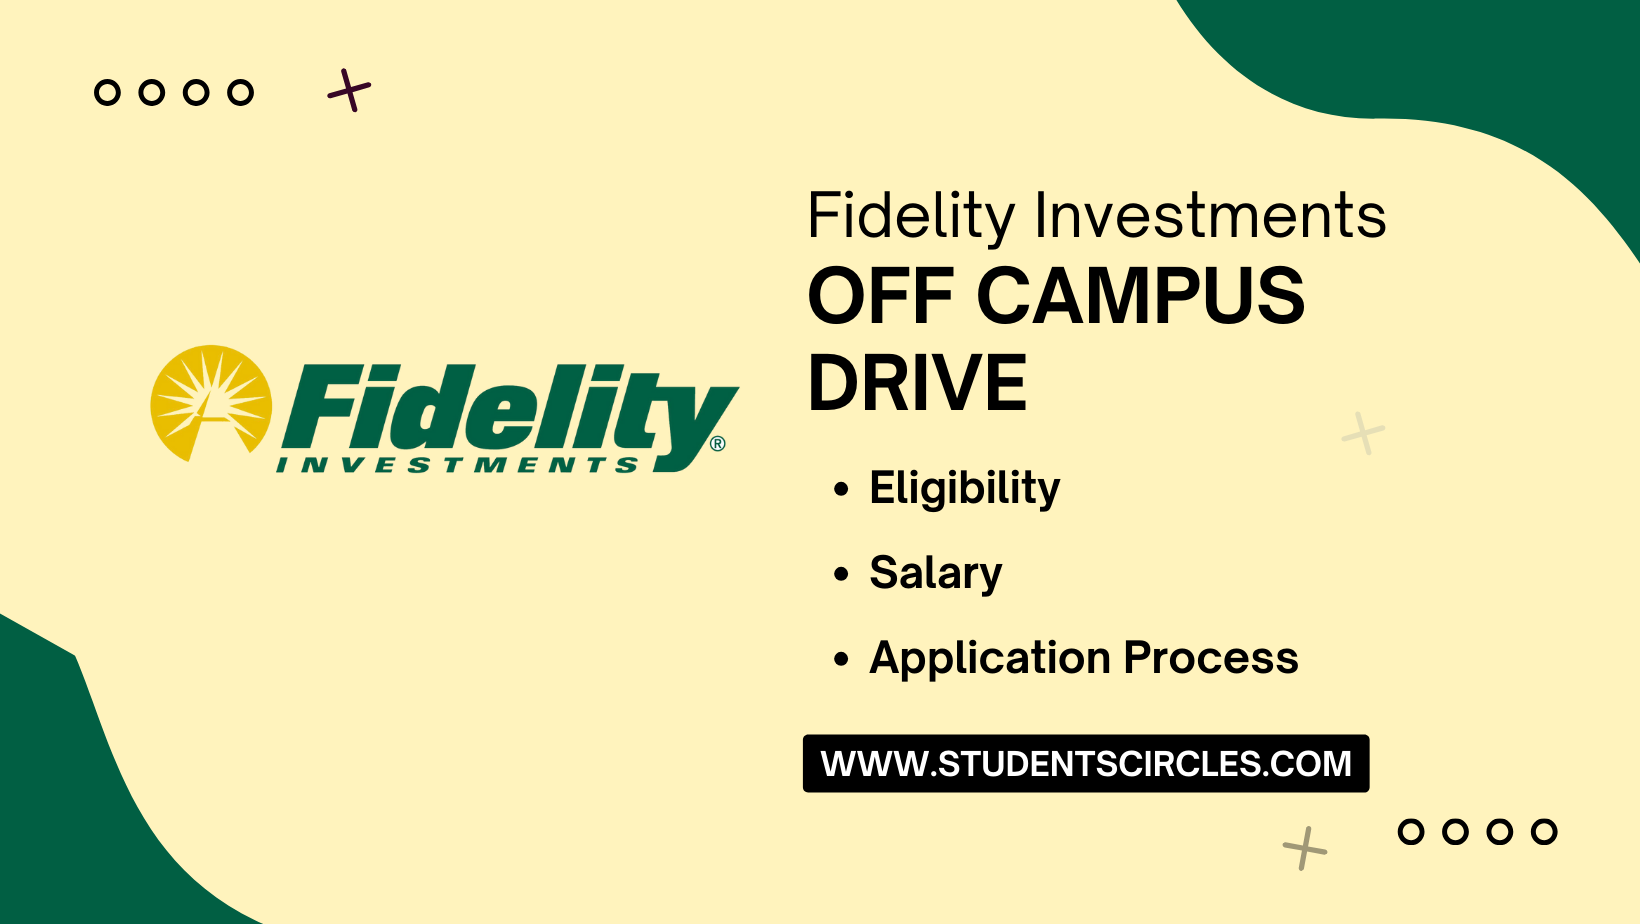 Fidelity Investments Off Campus Drive